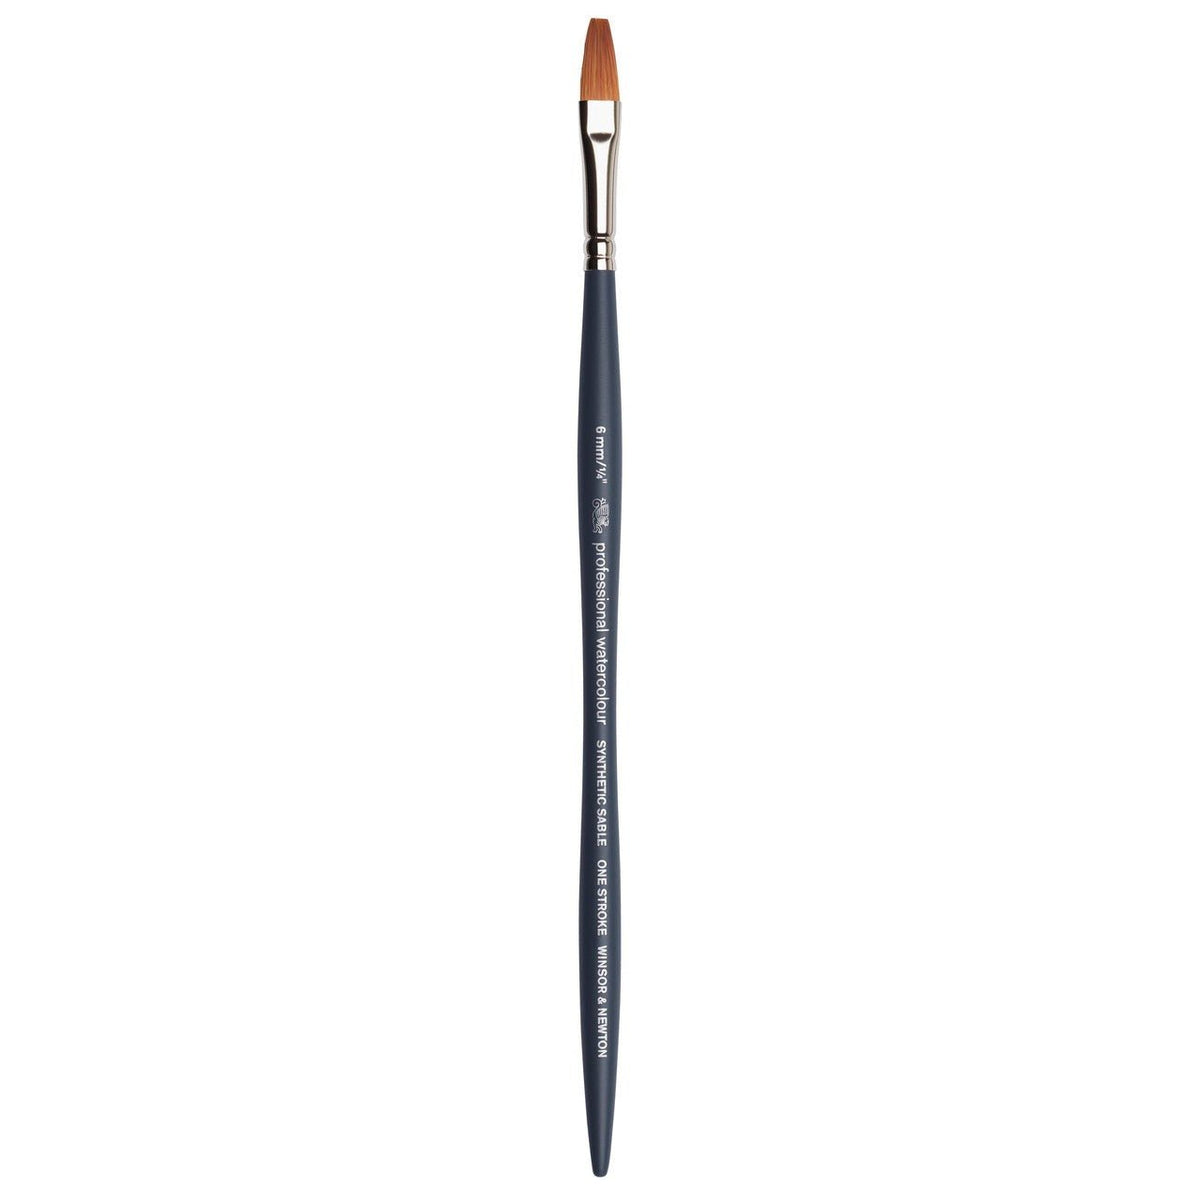 Winsor & Newton Professional Watercolor Synthetic Sable Brush Round 16